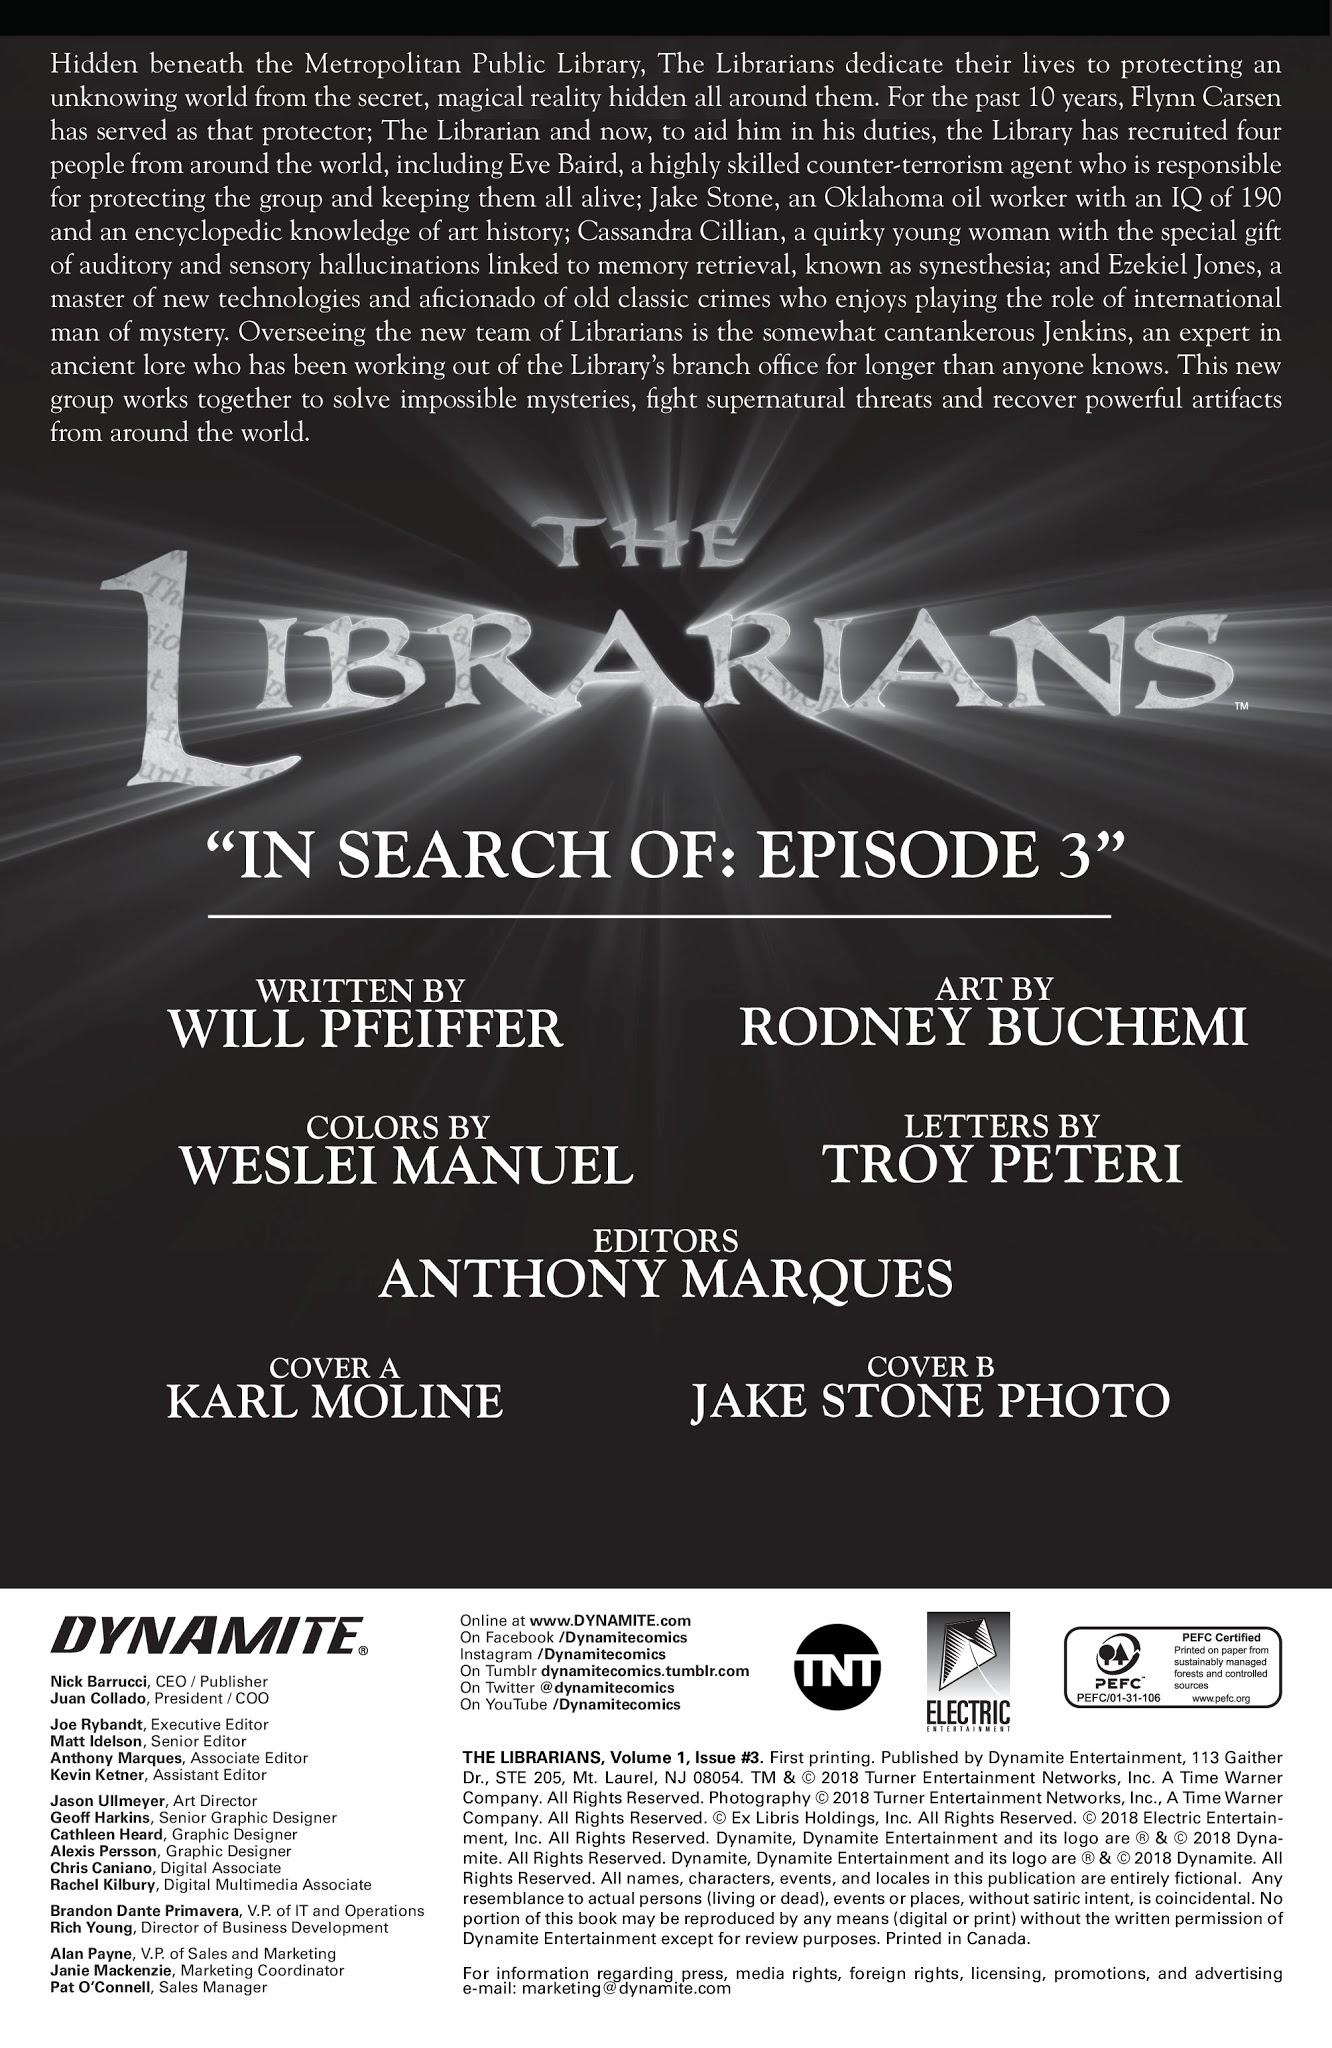 Read online The Librarians comic -  Issue #3 - 3